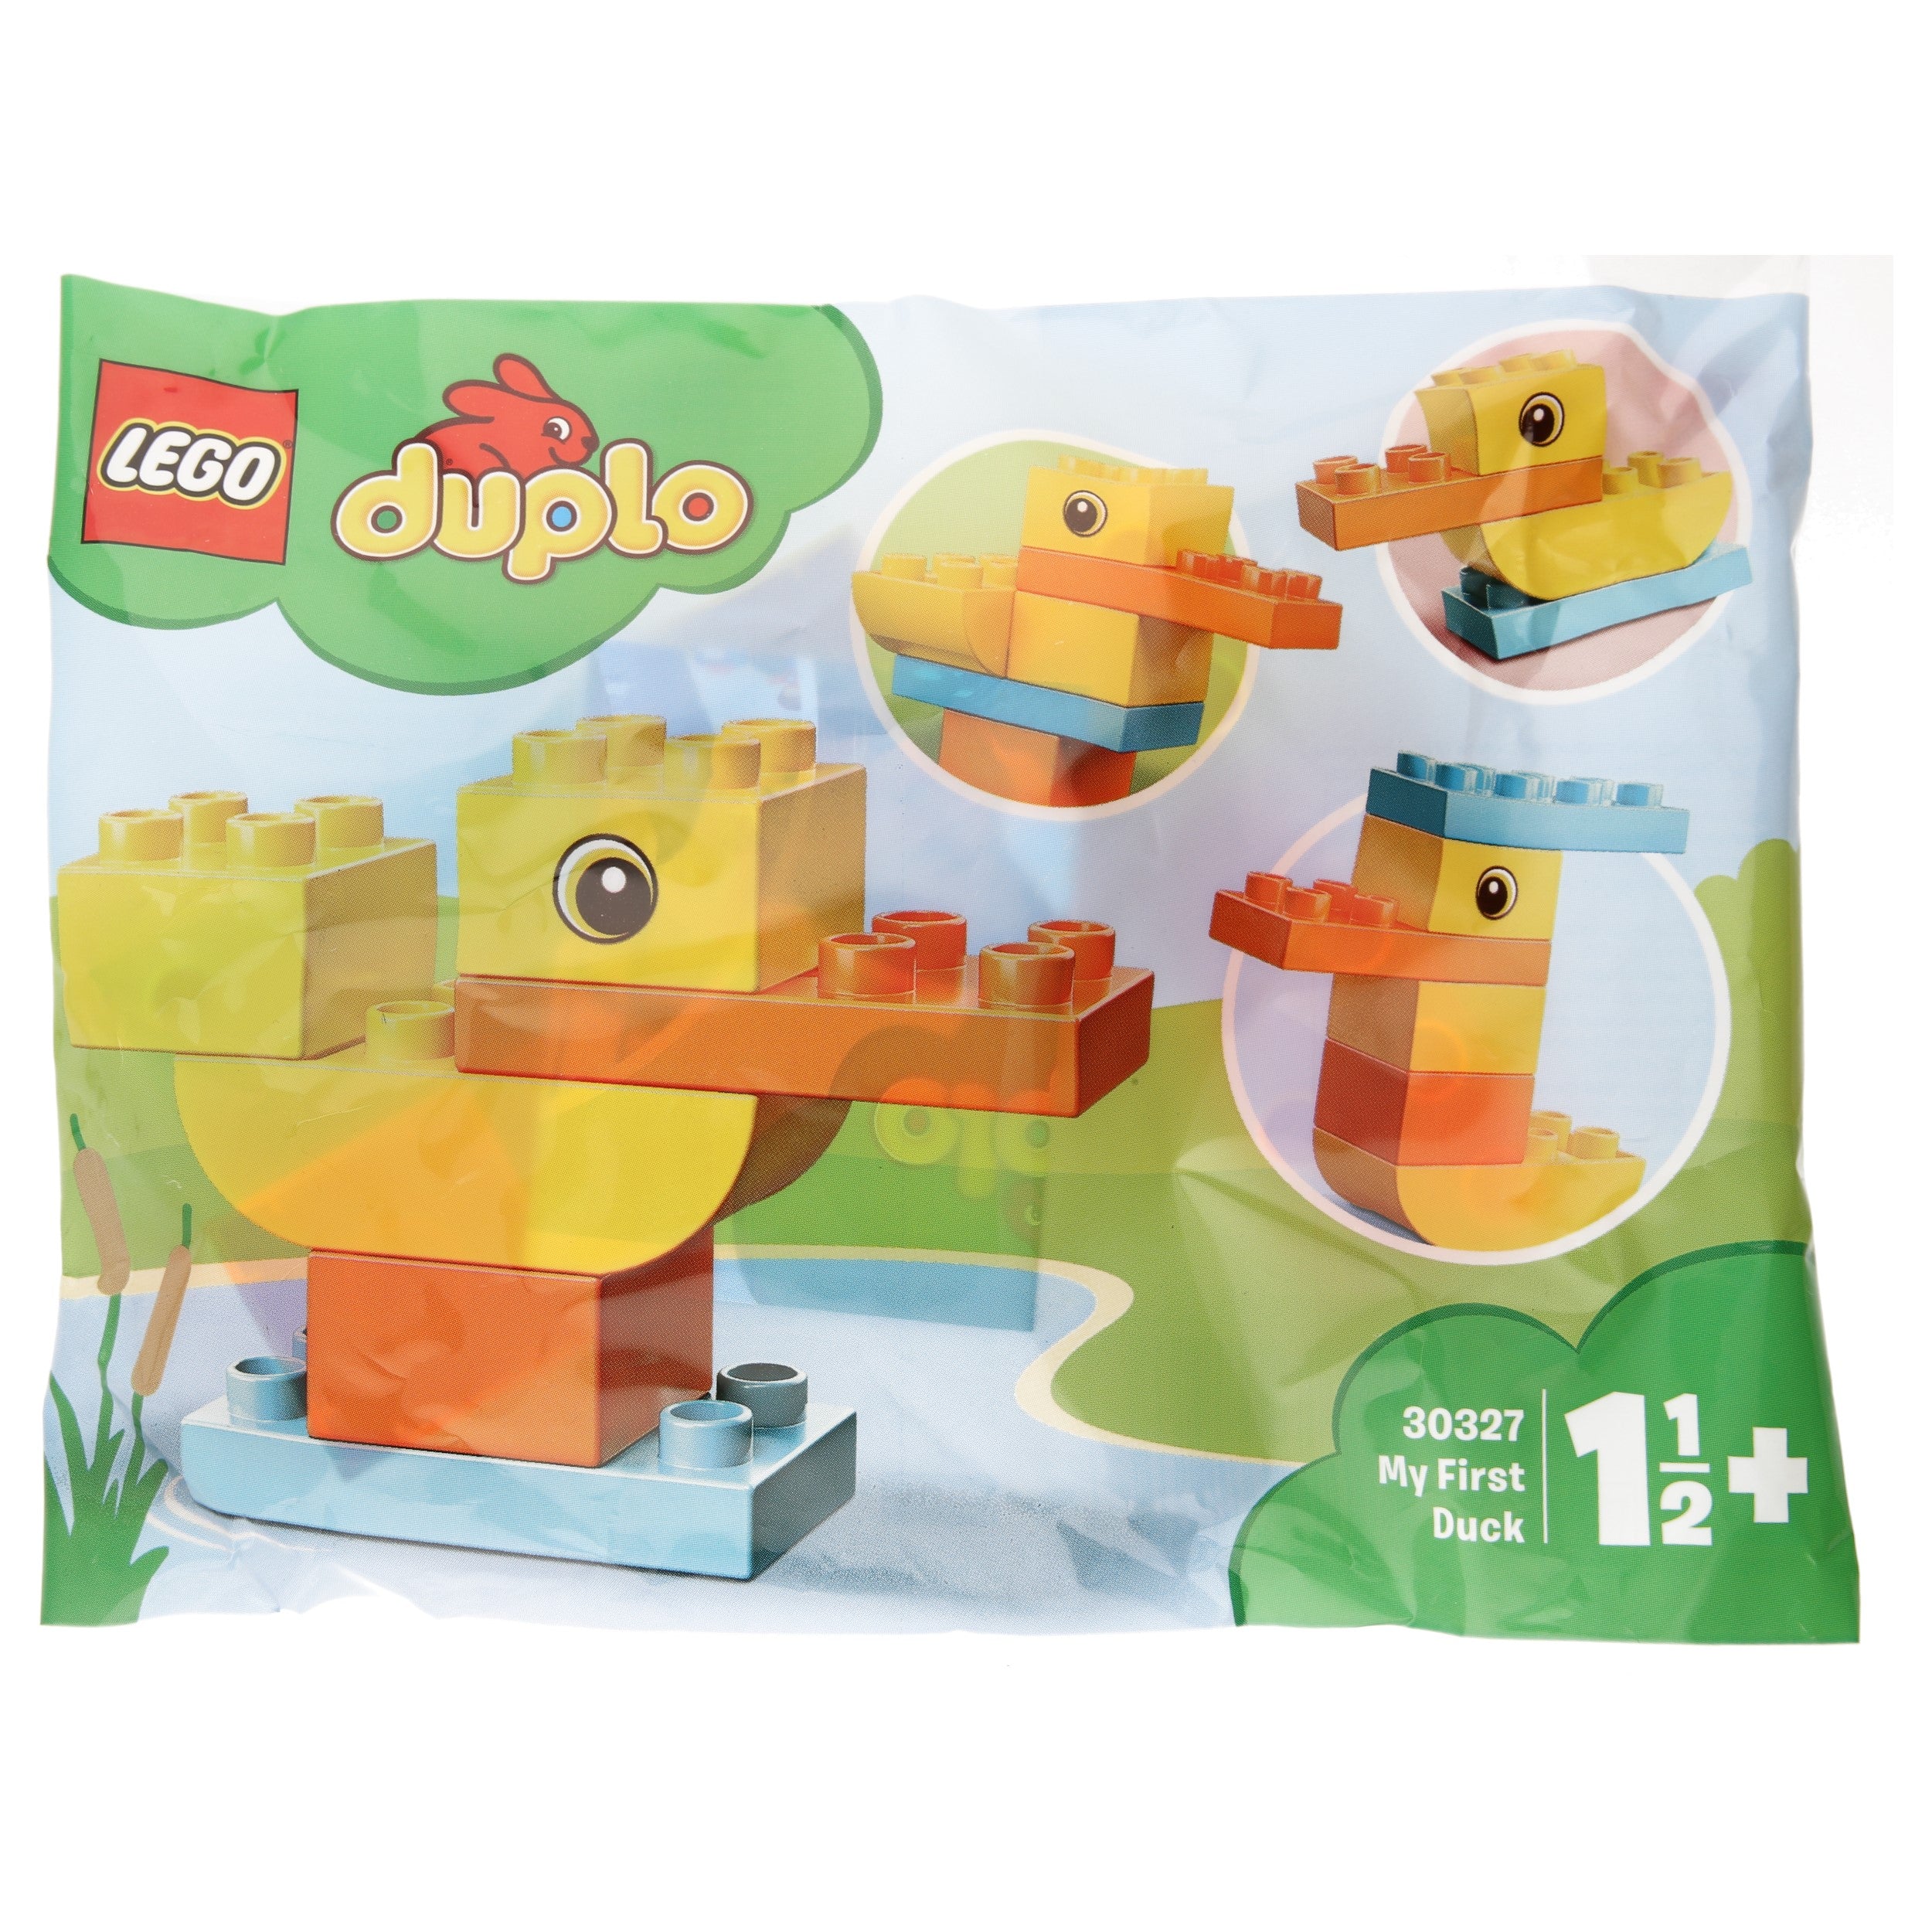 LEGO DUPLO kits - my first duck (polybag)